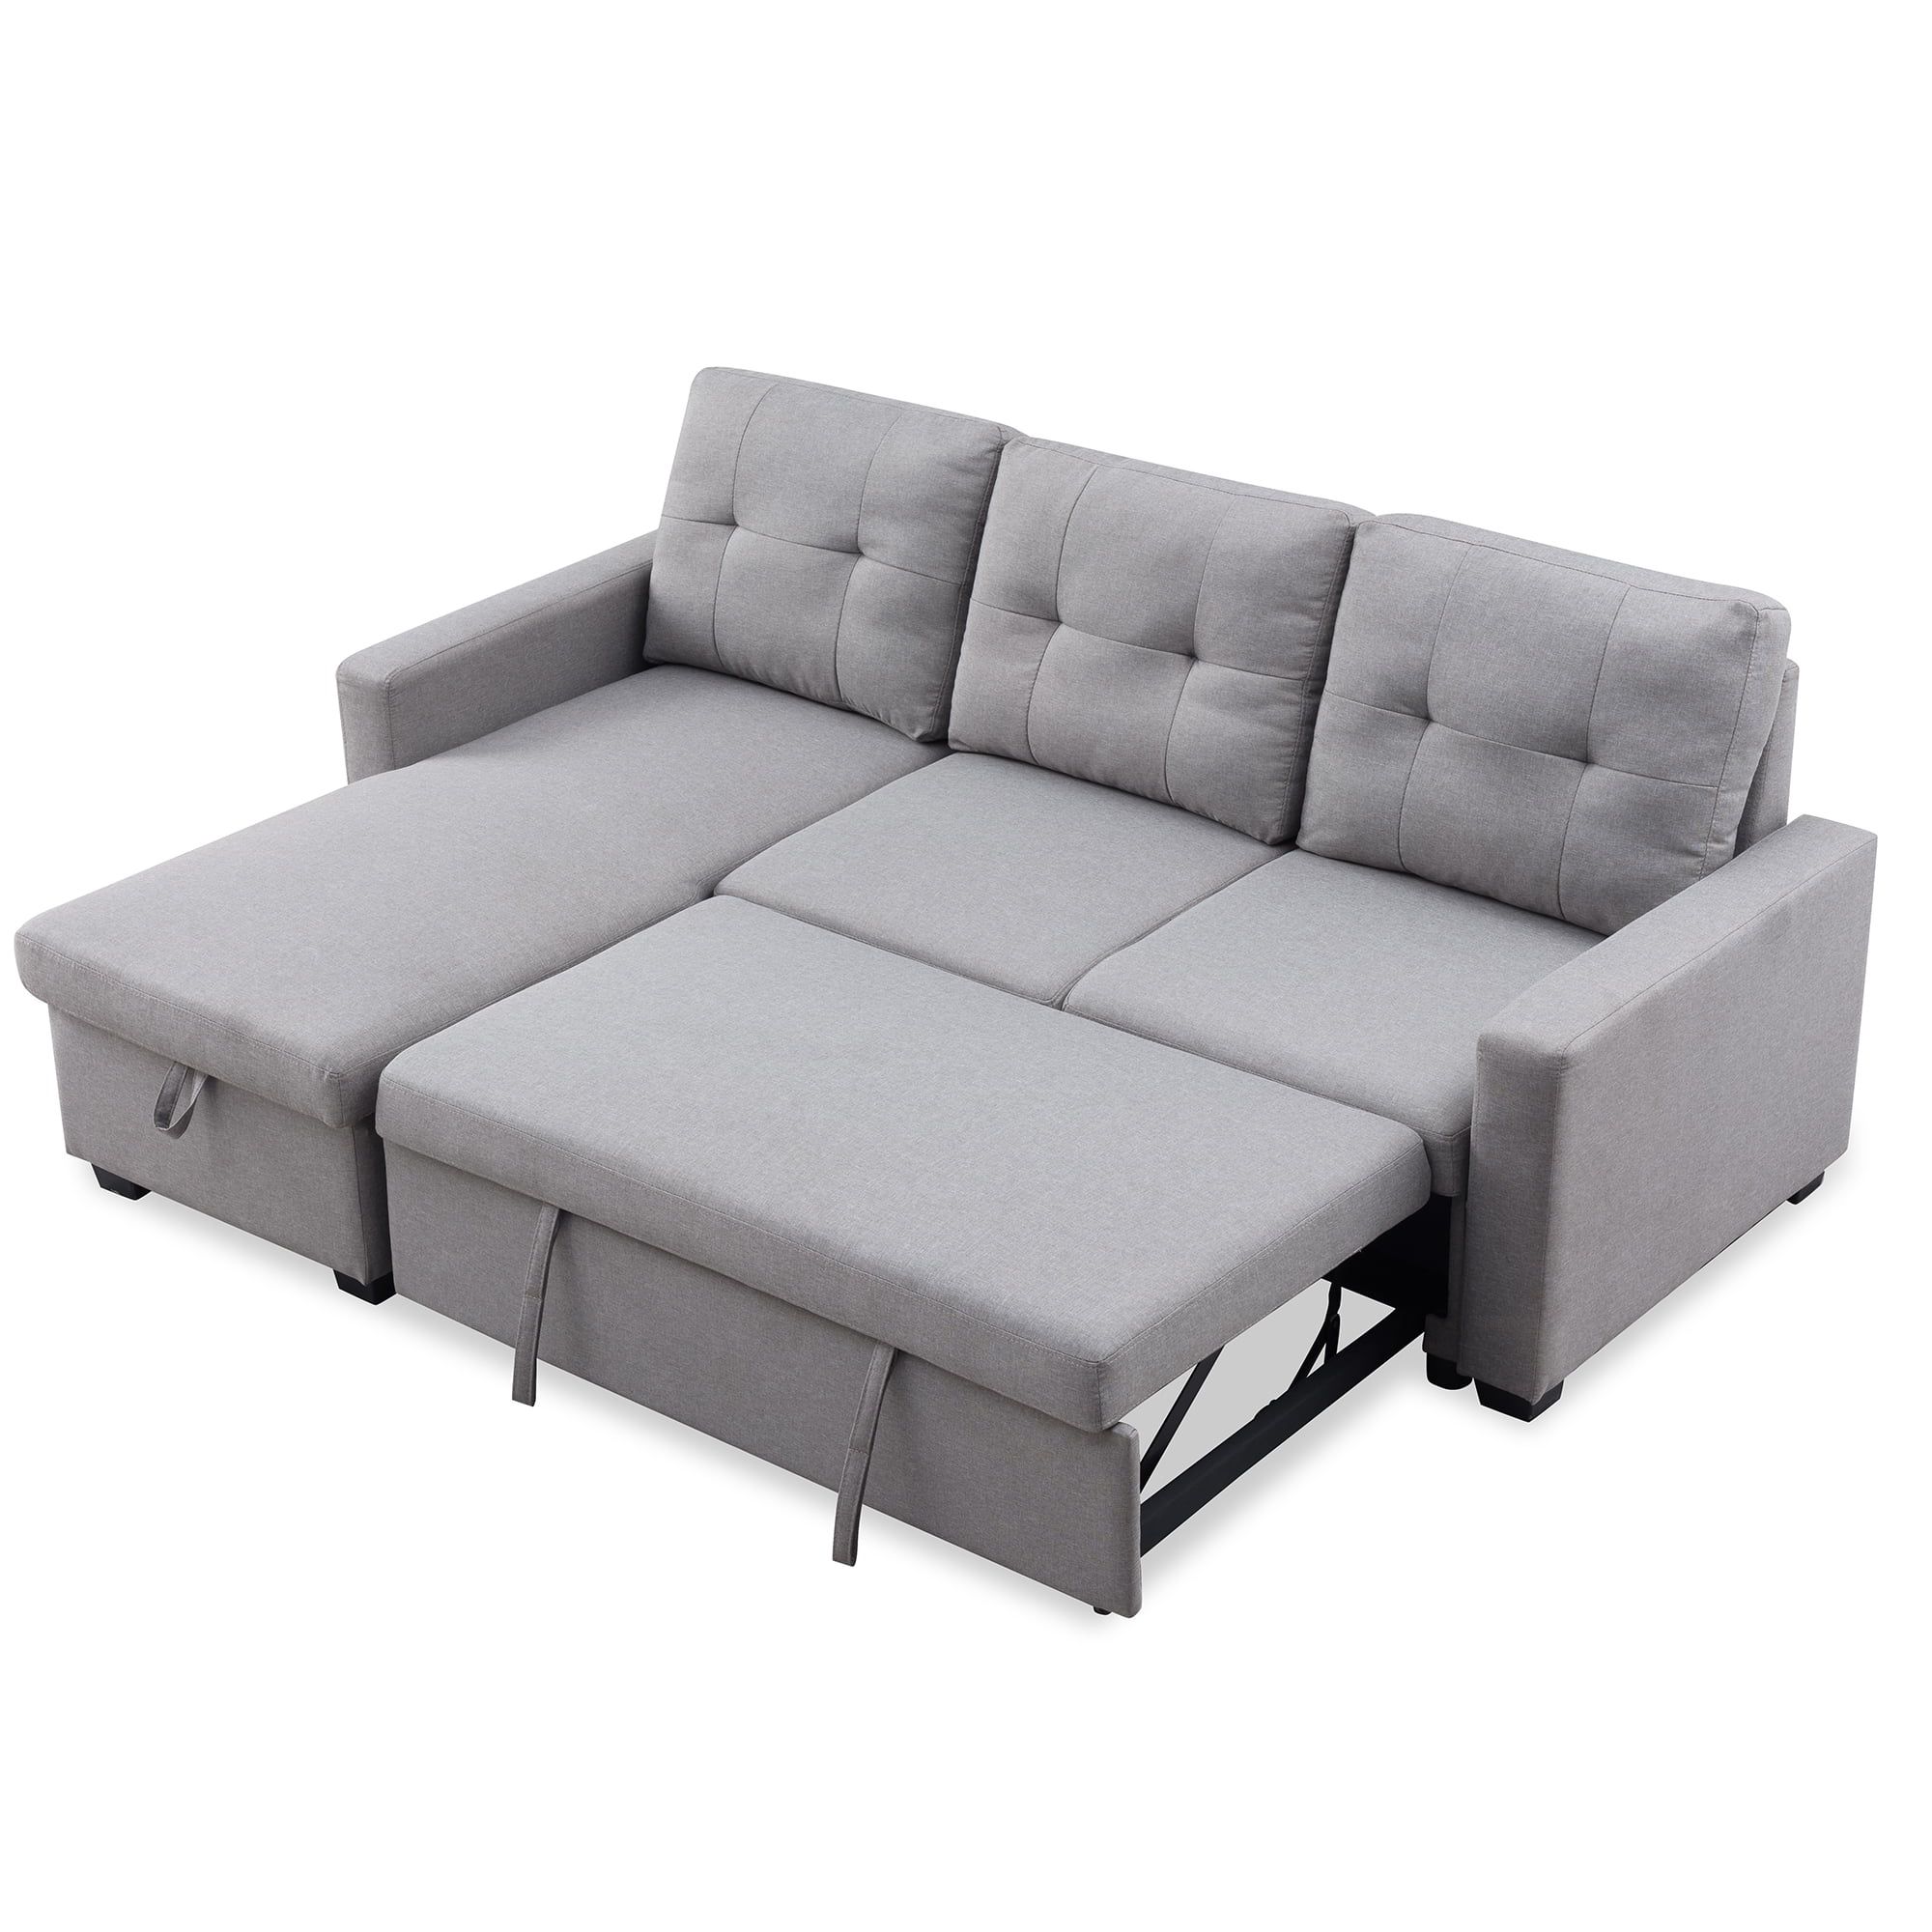 Tufted Sectional Sofa Bed With Fold Out Pull Out Sleeper And Reversible In 3 In 1 Gray Pull Out Sleeper Sofas (View 9 of 20)